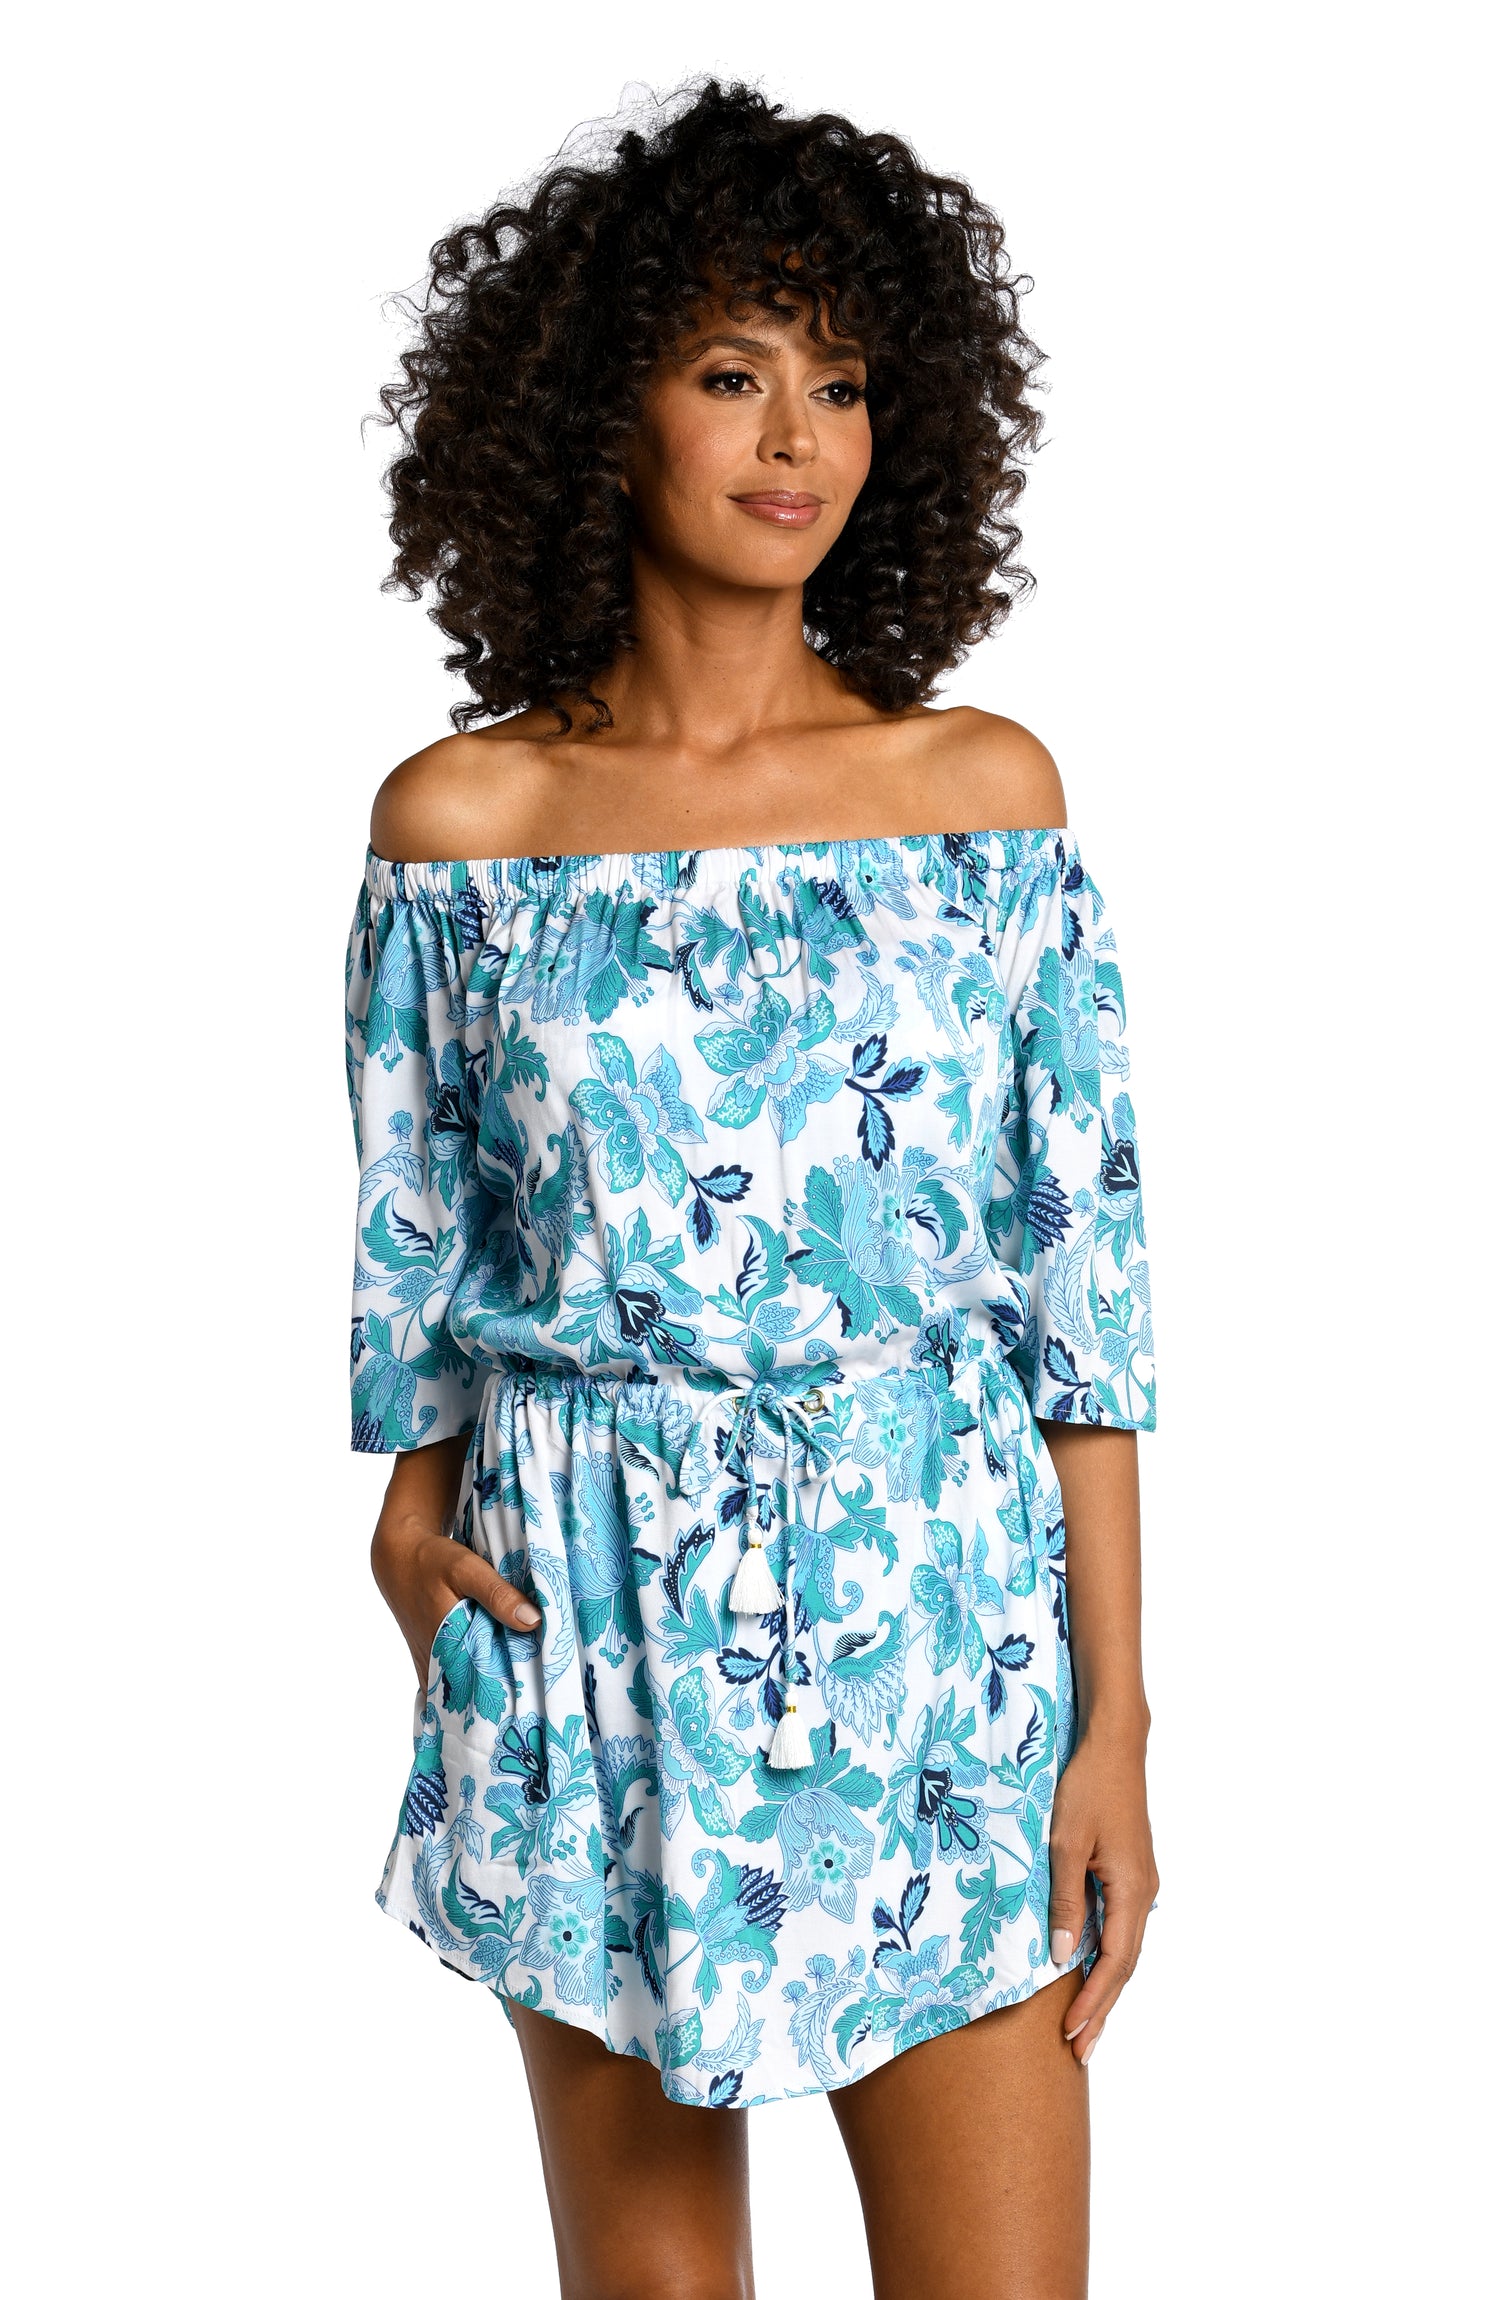 Model is wearing a light blue multi colored mediterranean printed off shoulder dress cover up from our Santorini Sun collection!